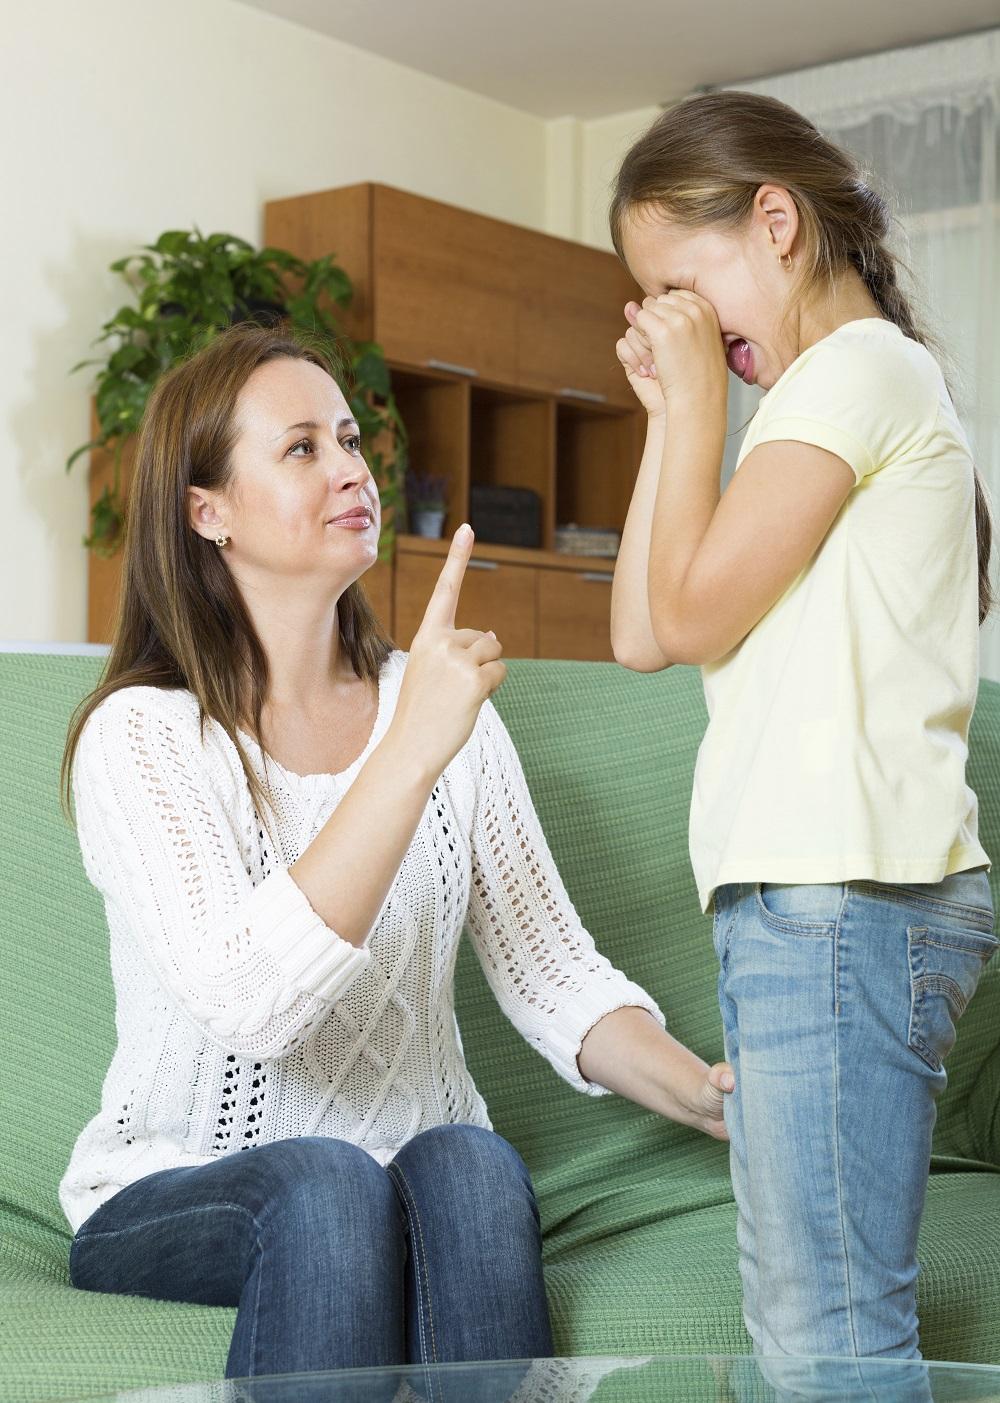 How To Teach Your Child Not To Lie